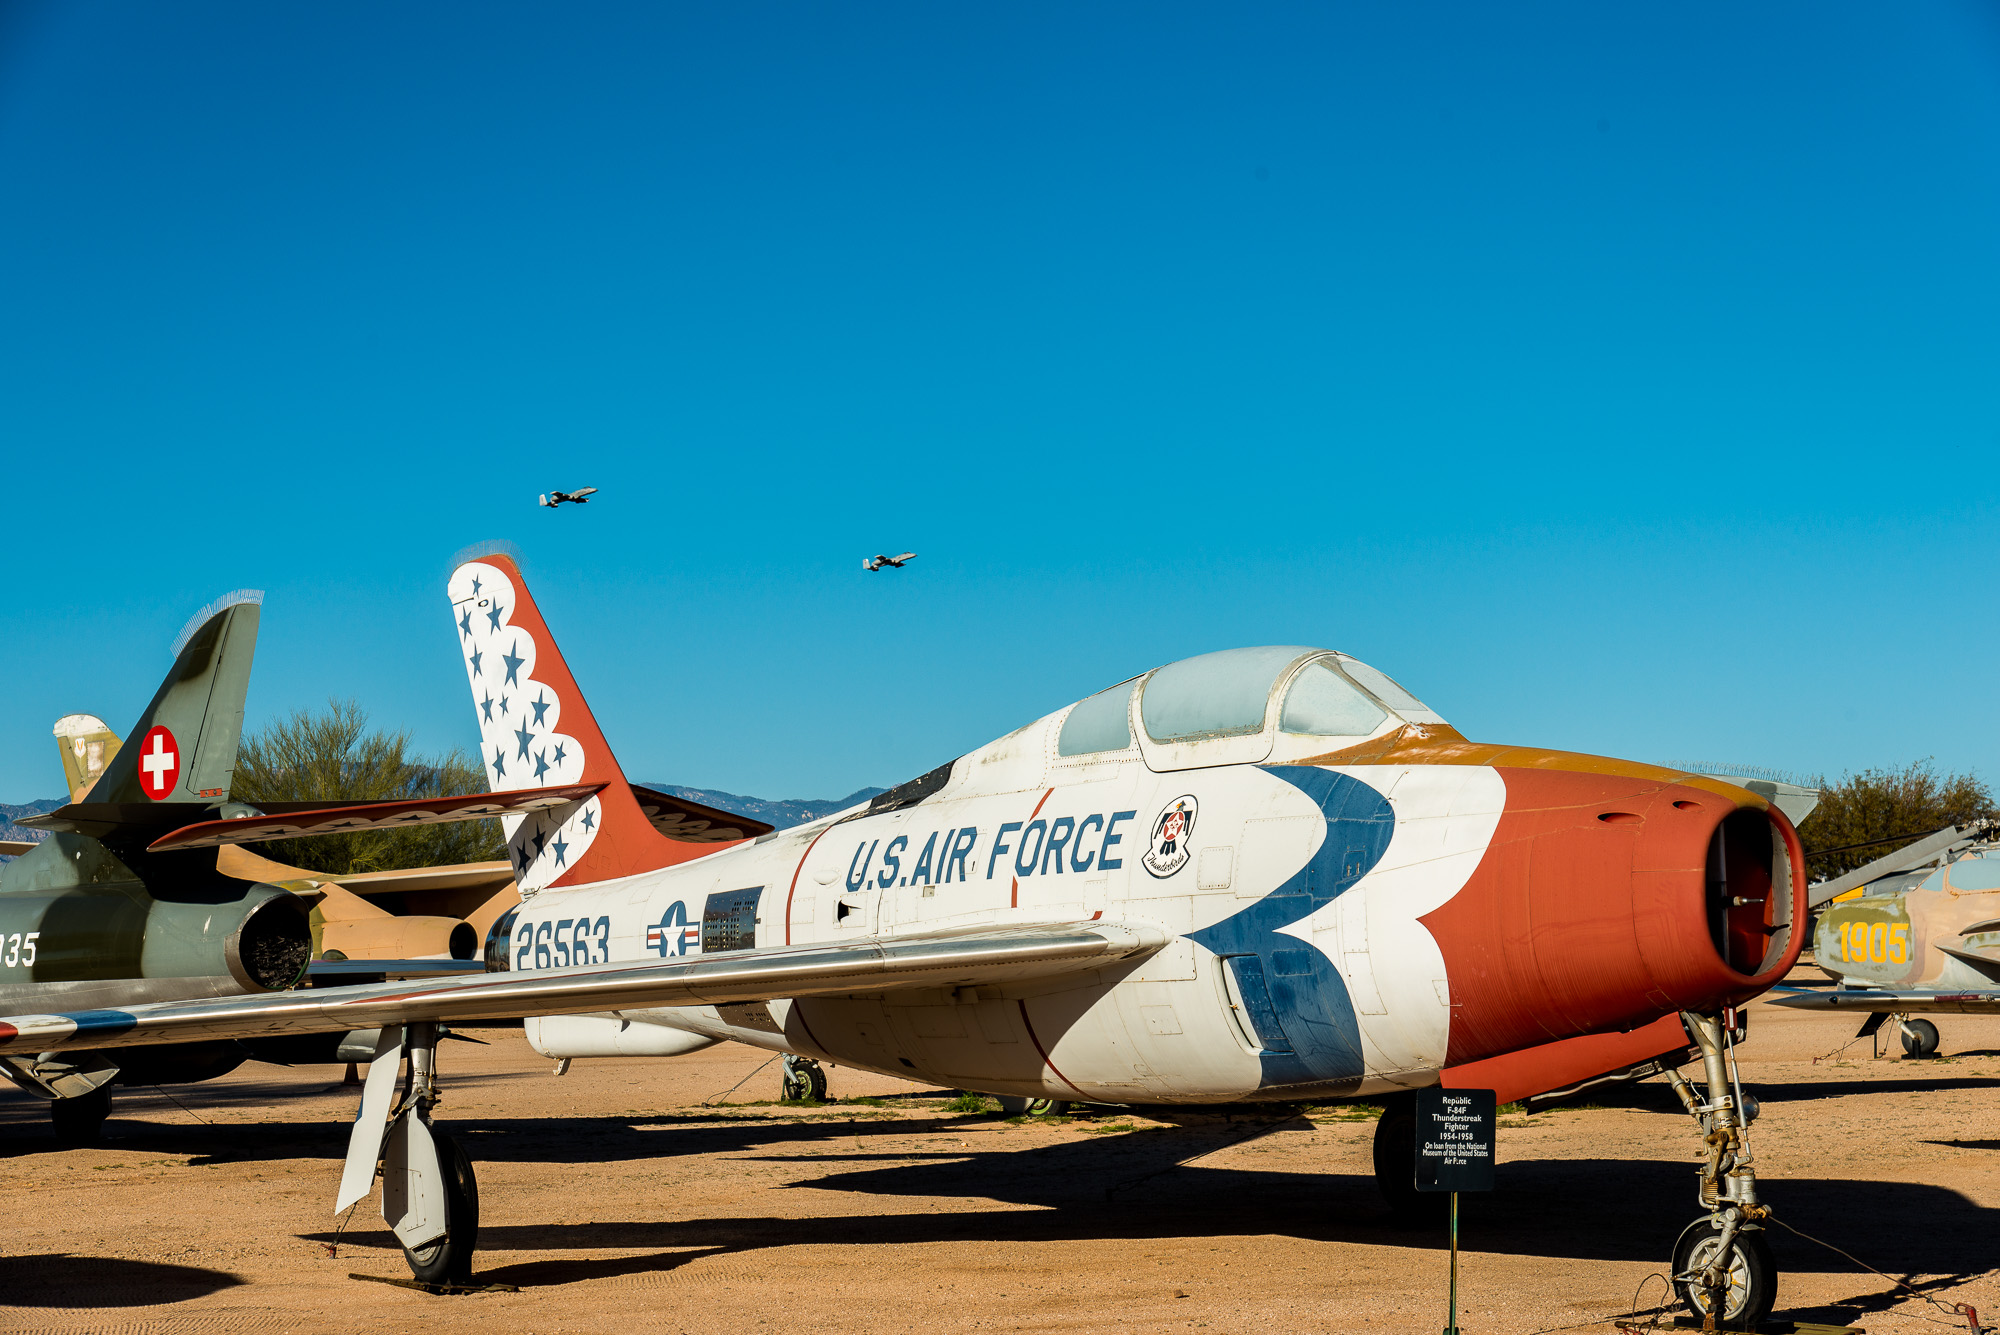 Pima and Air Space Museum